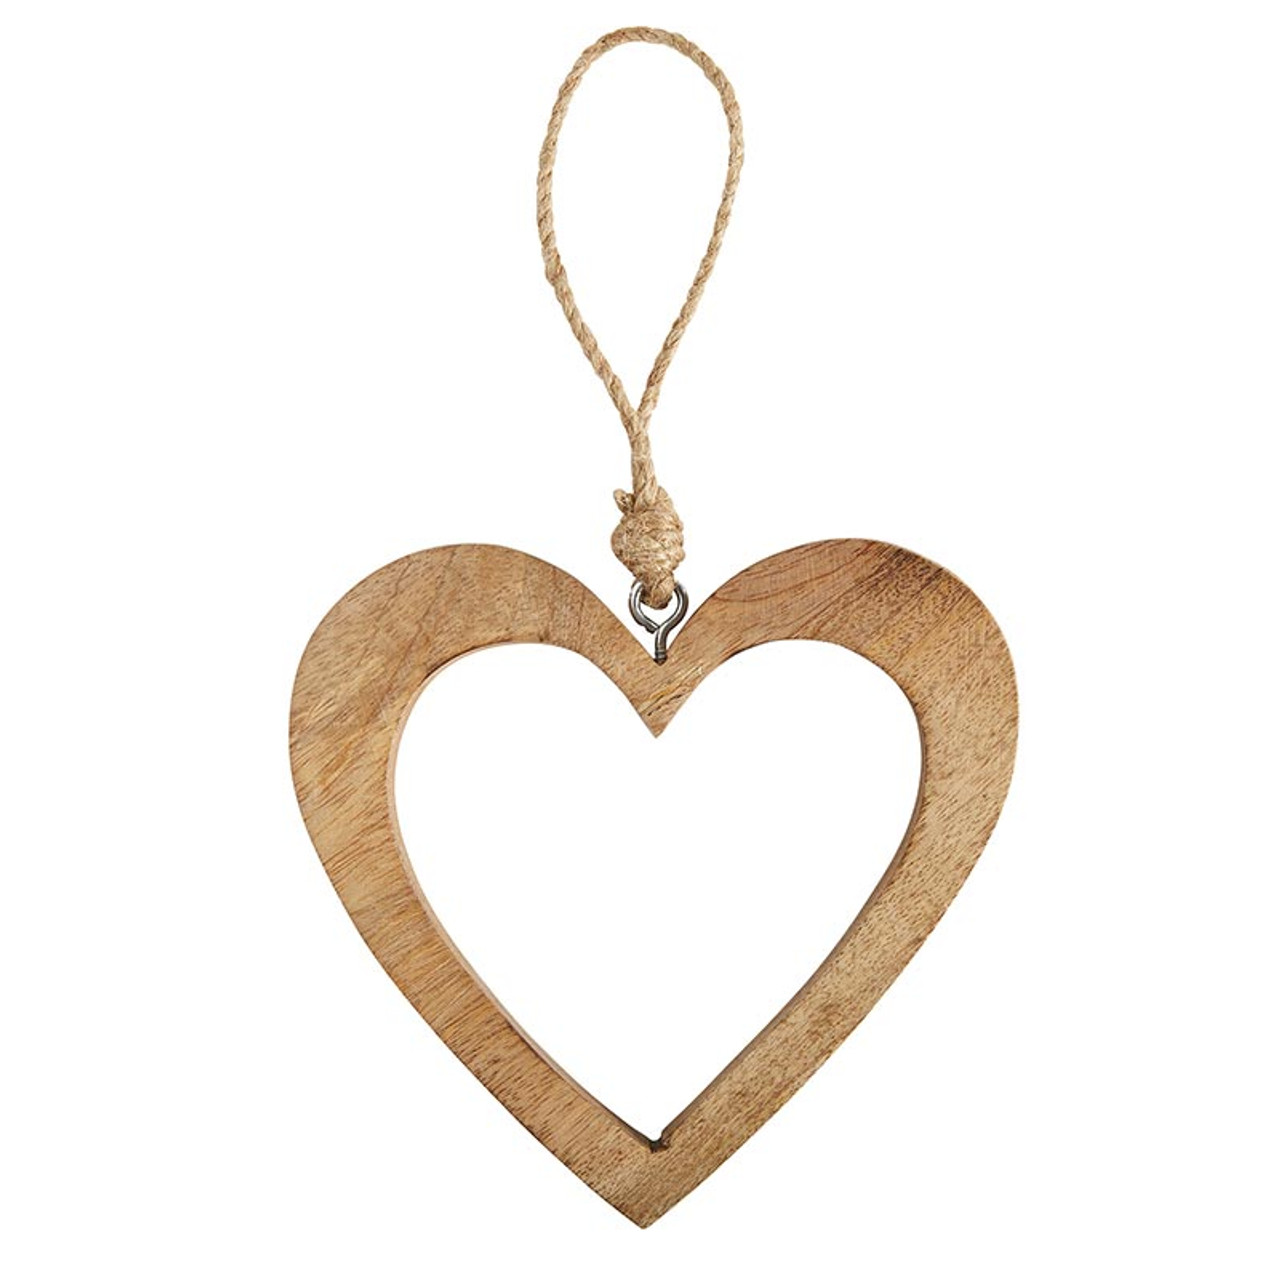 Solid Wood Heart 16,5 cm decorated with Flowers grey border to hang in  Obernai